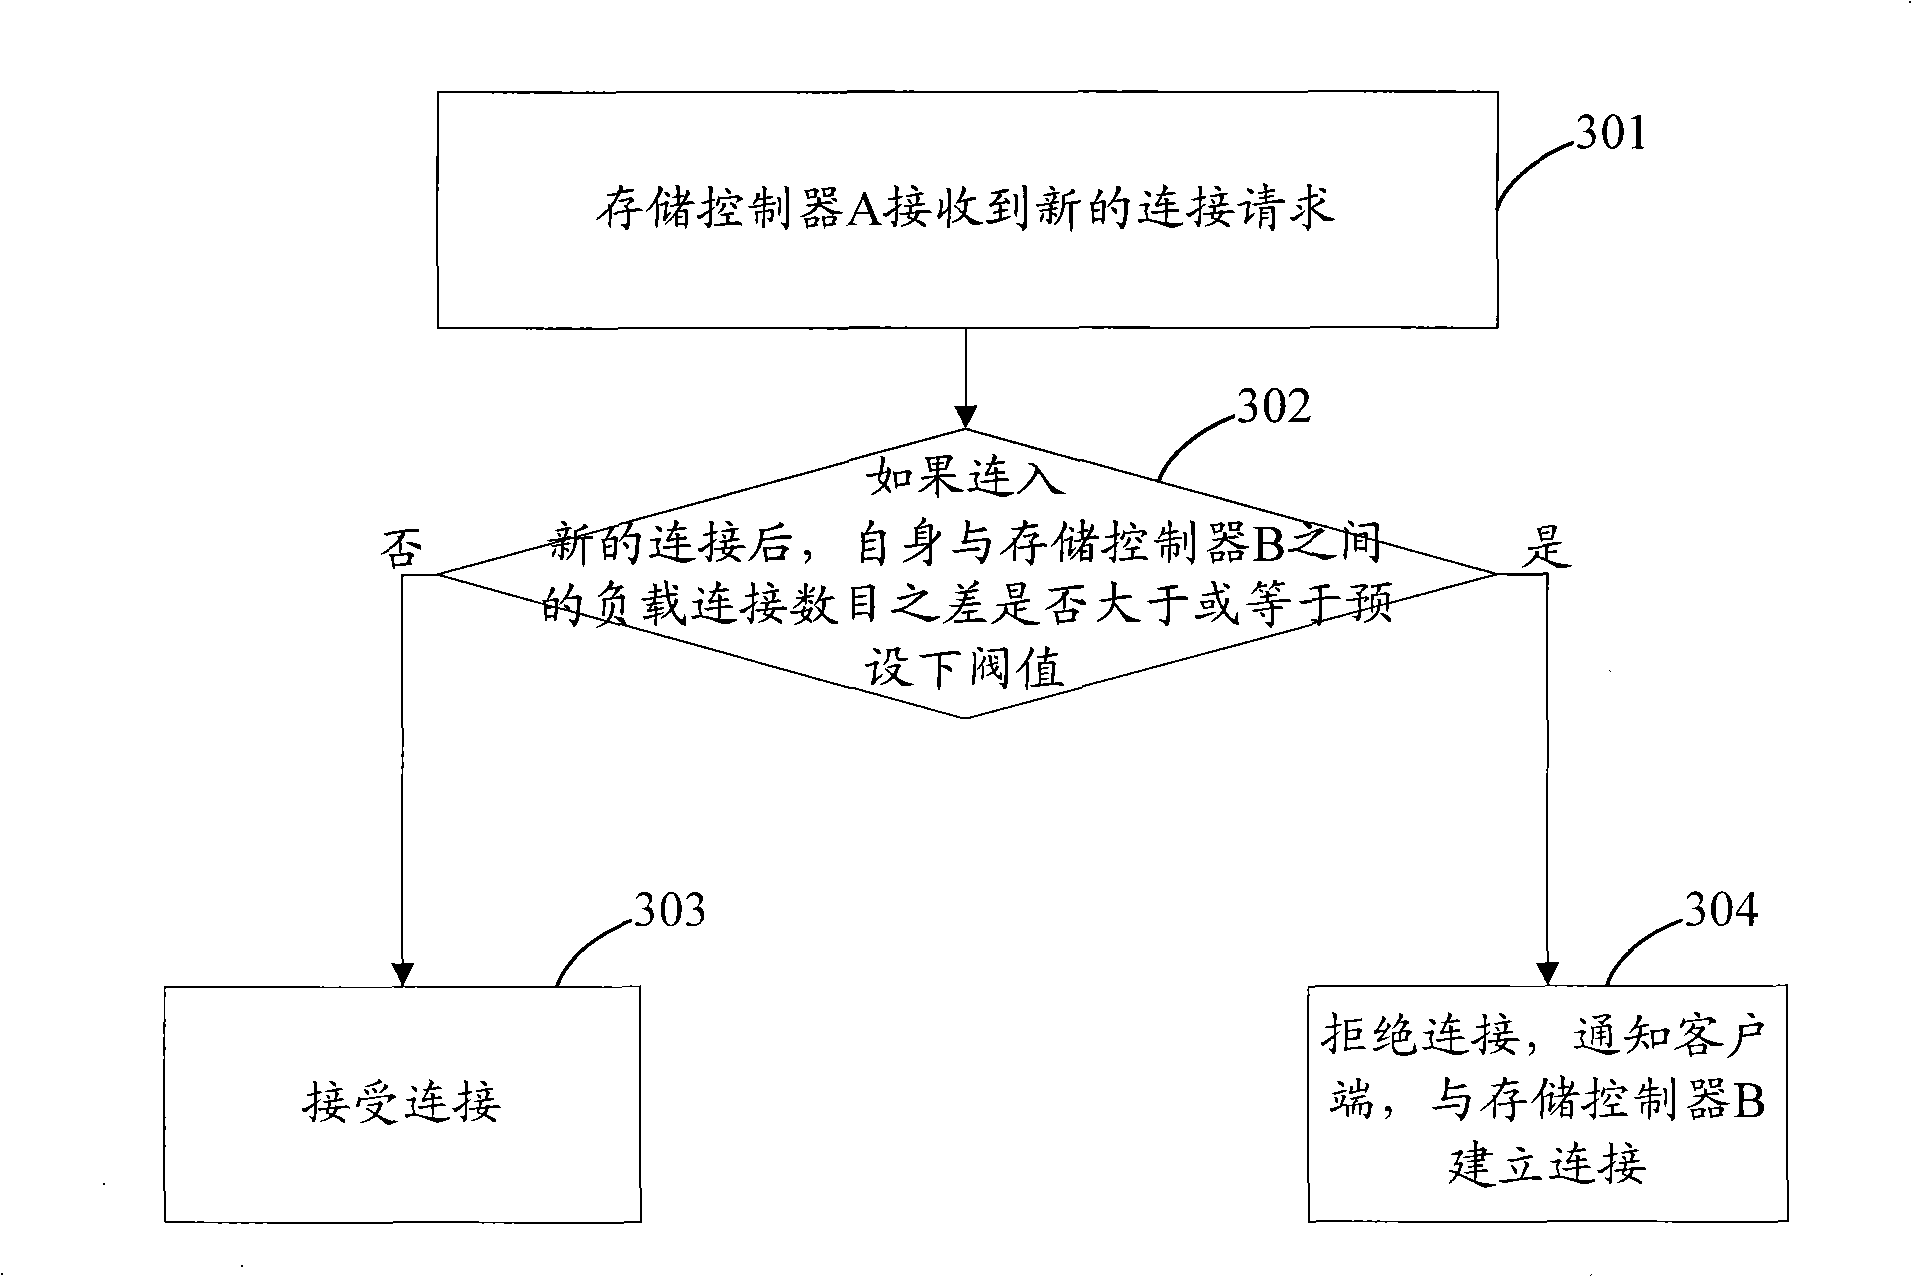 Load equalization implementing method, storage control equipment and memory system